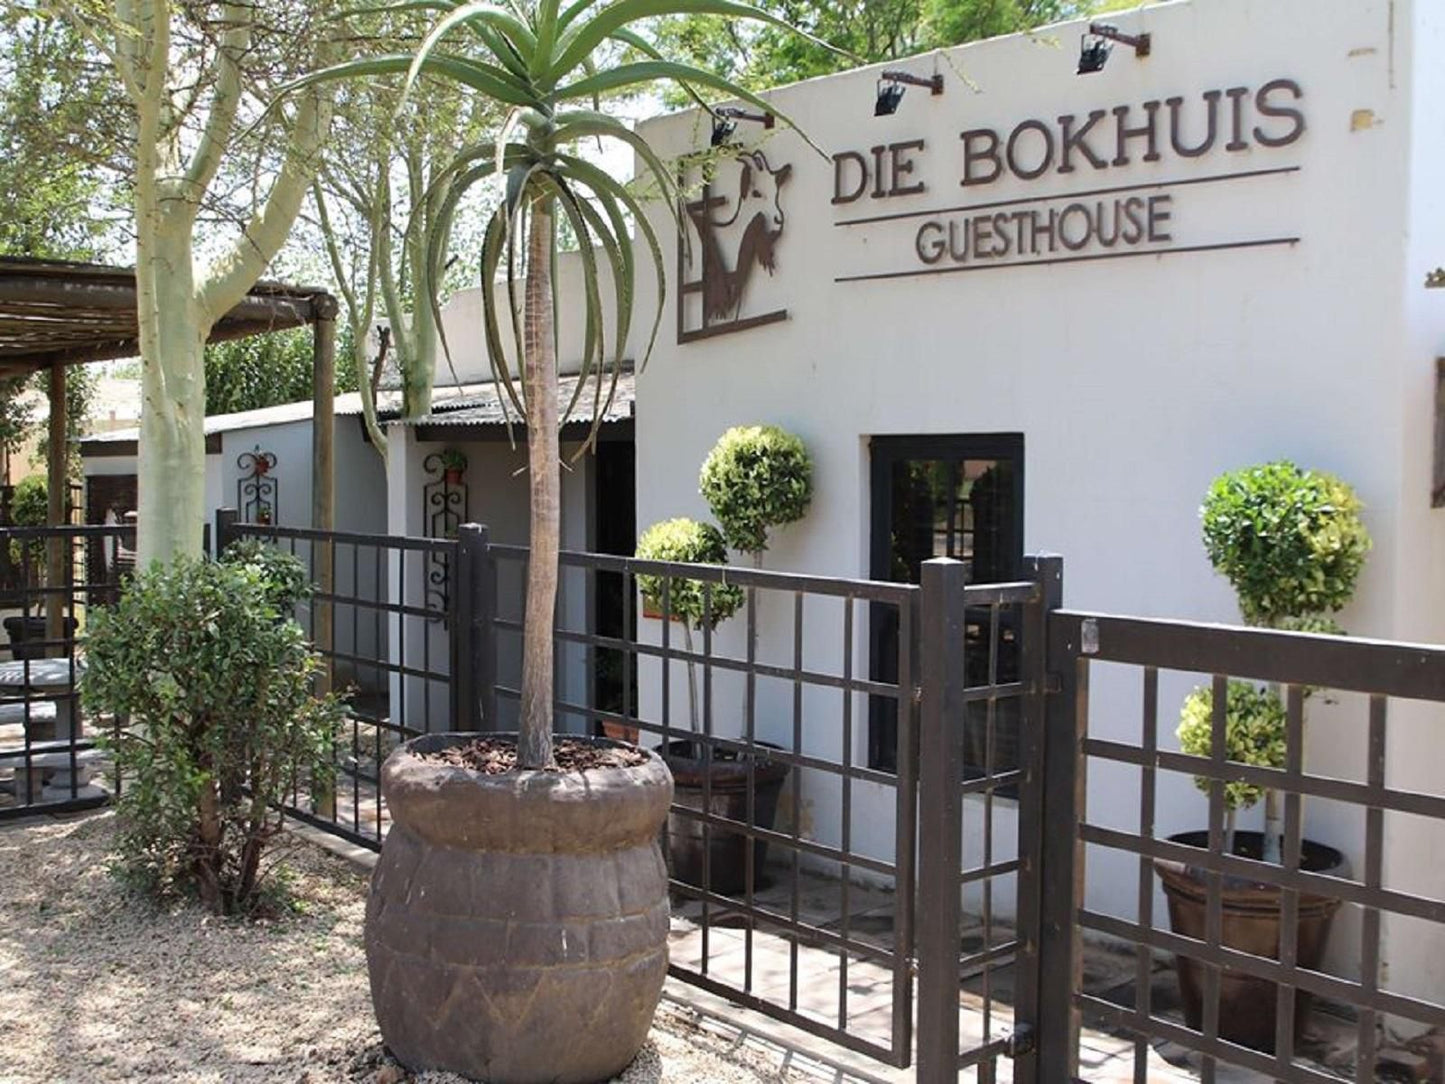 Die Bokhuis Guesthouse Vredendal Western Cape South Africa House, Building, Architecture, Bar, Food